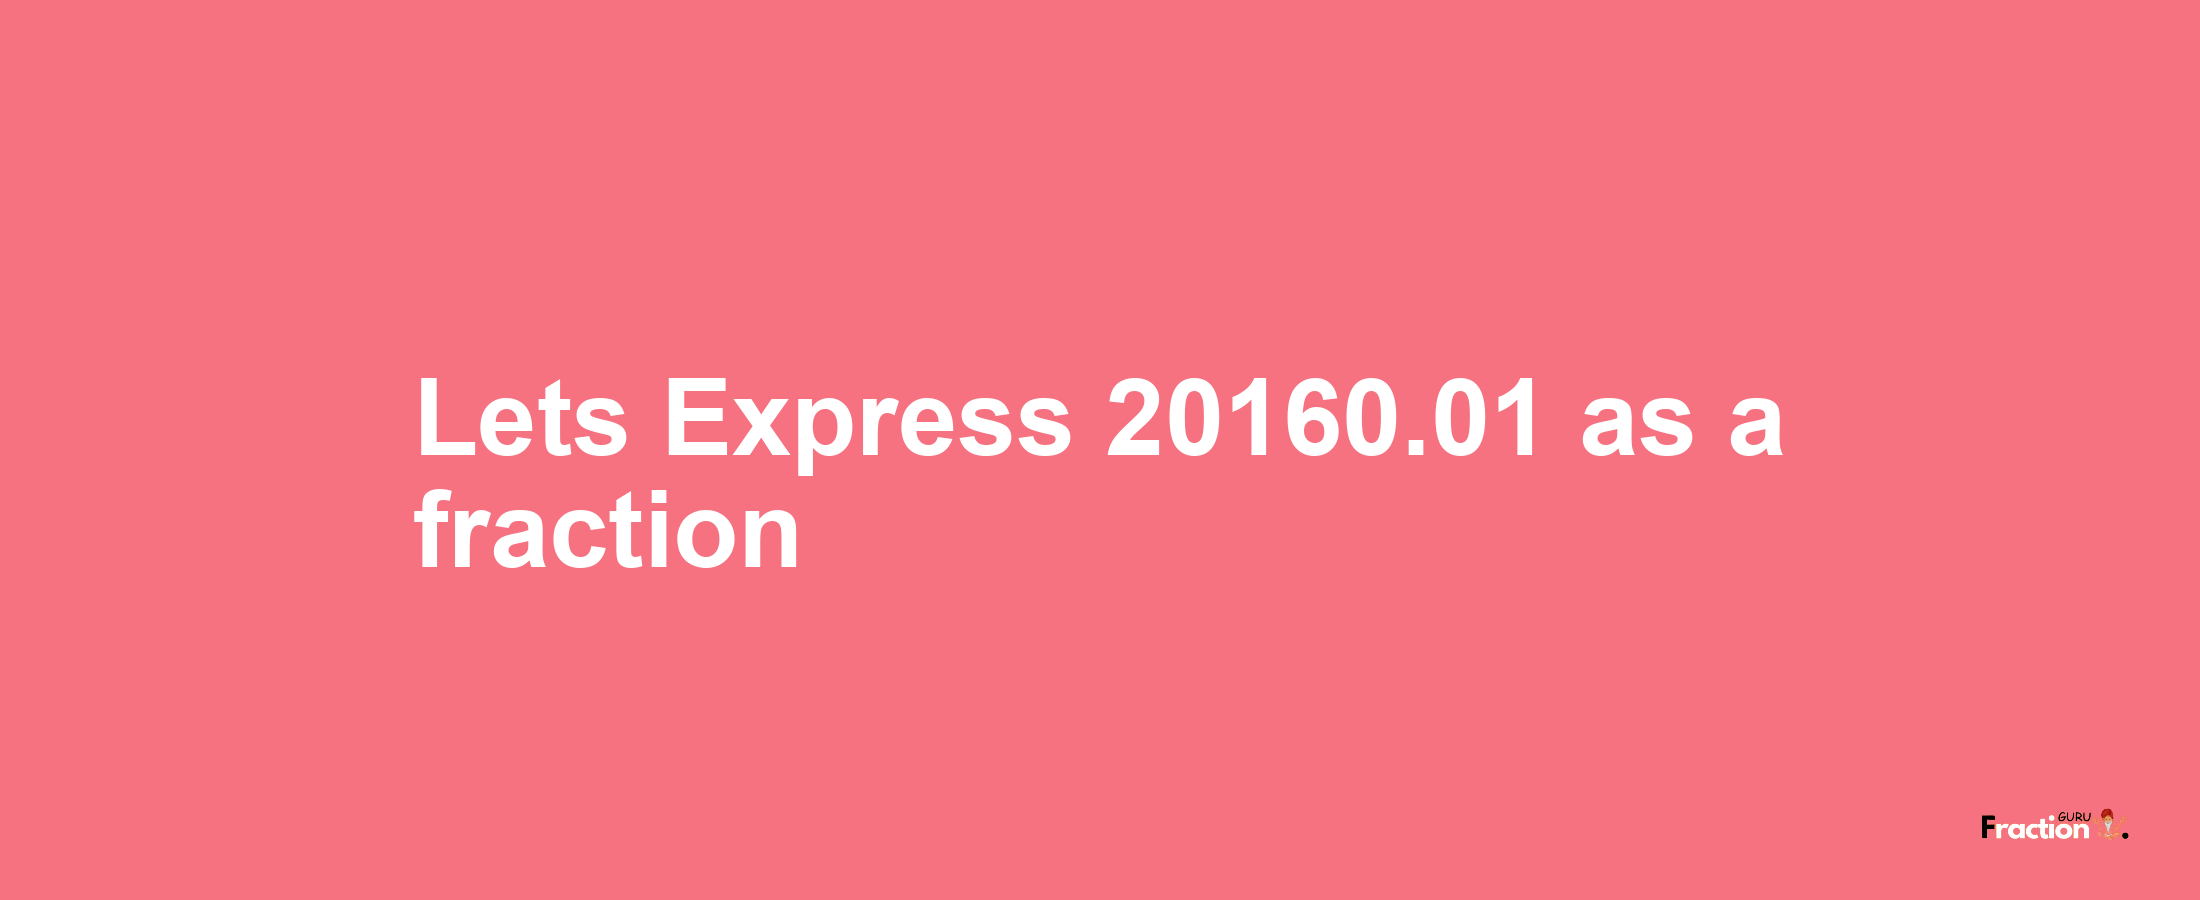 Lets Express 20160.01 as afraction